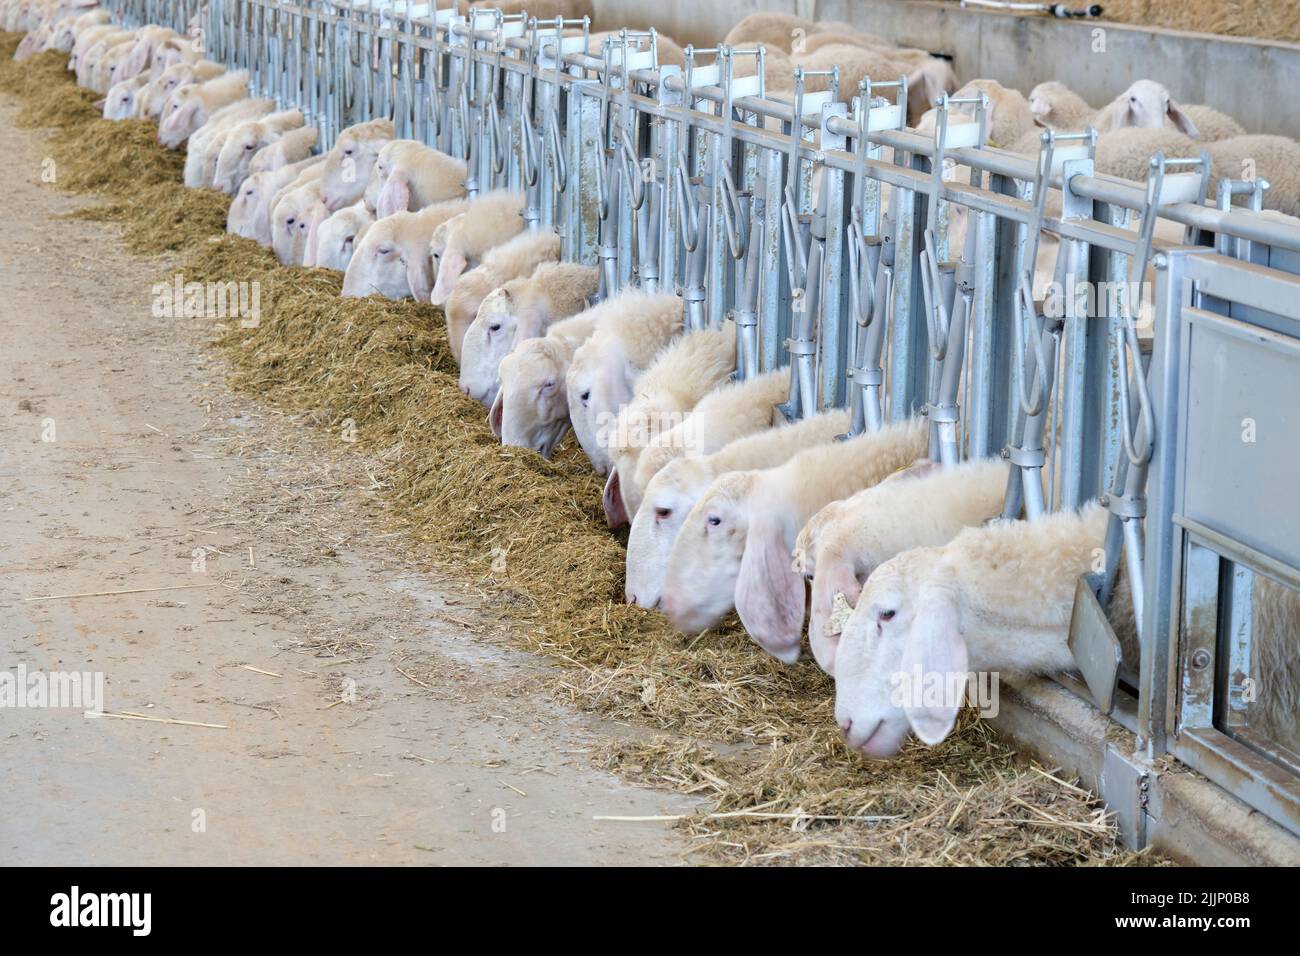 Group of white sheep feeding on hay in the stable behind a metal fence Stock Photo